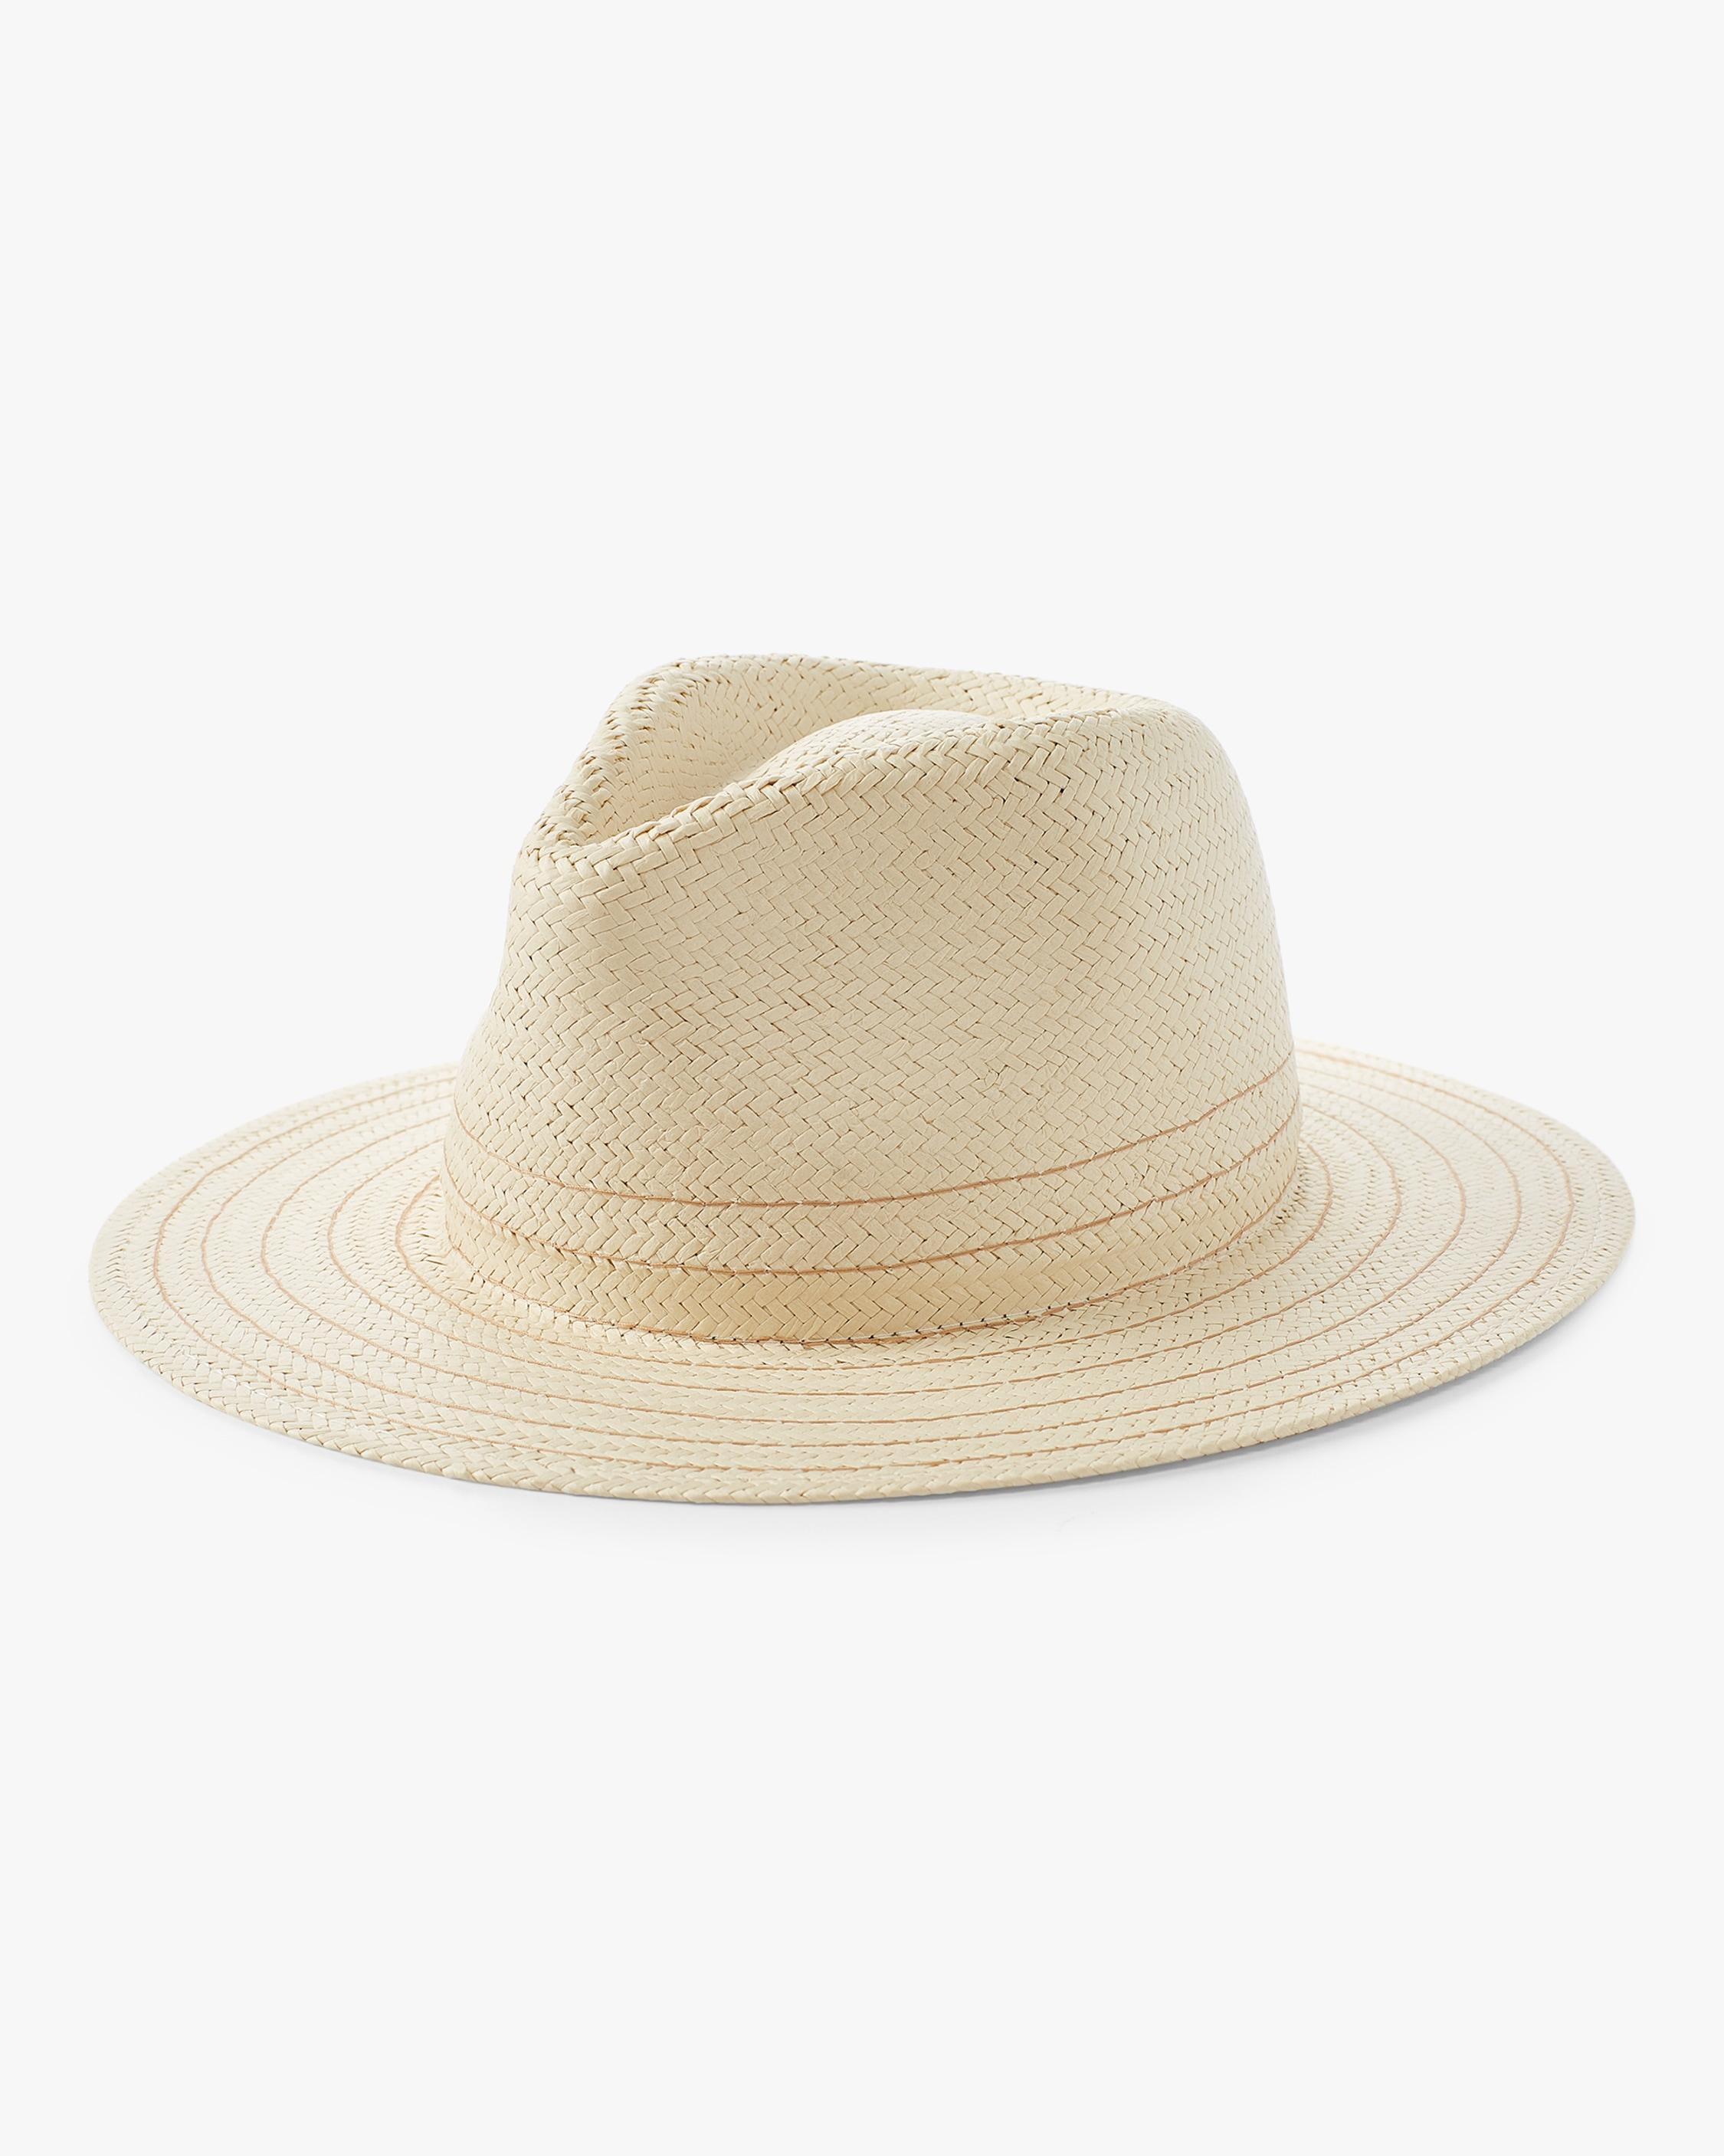 Rag & Bone Packable Straw Fedora in Natural - Lyst